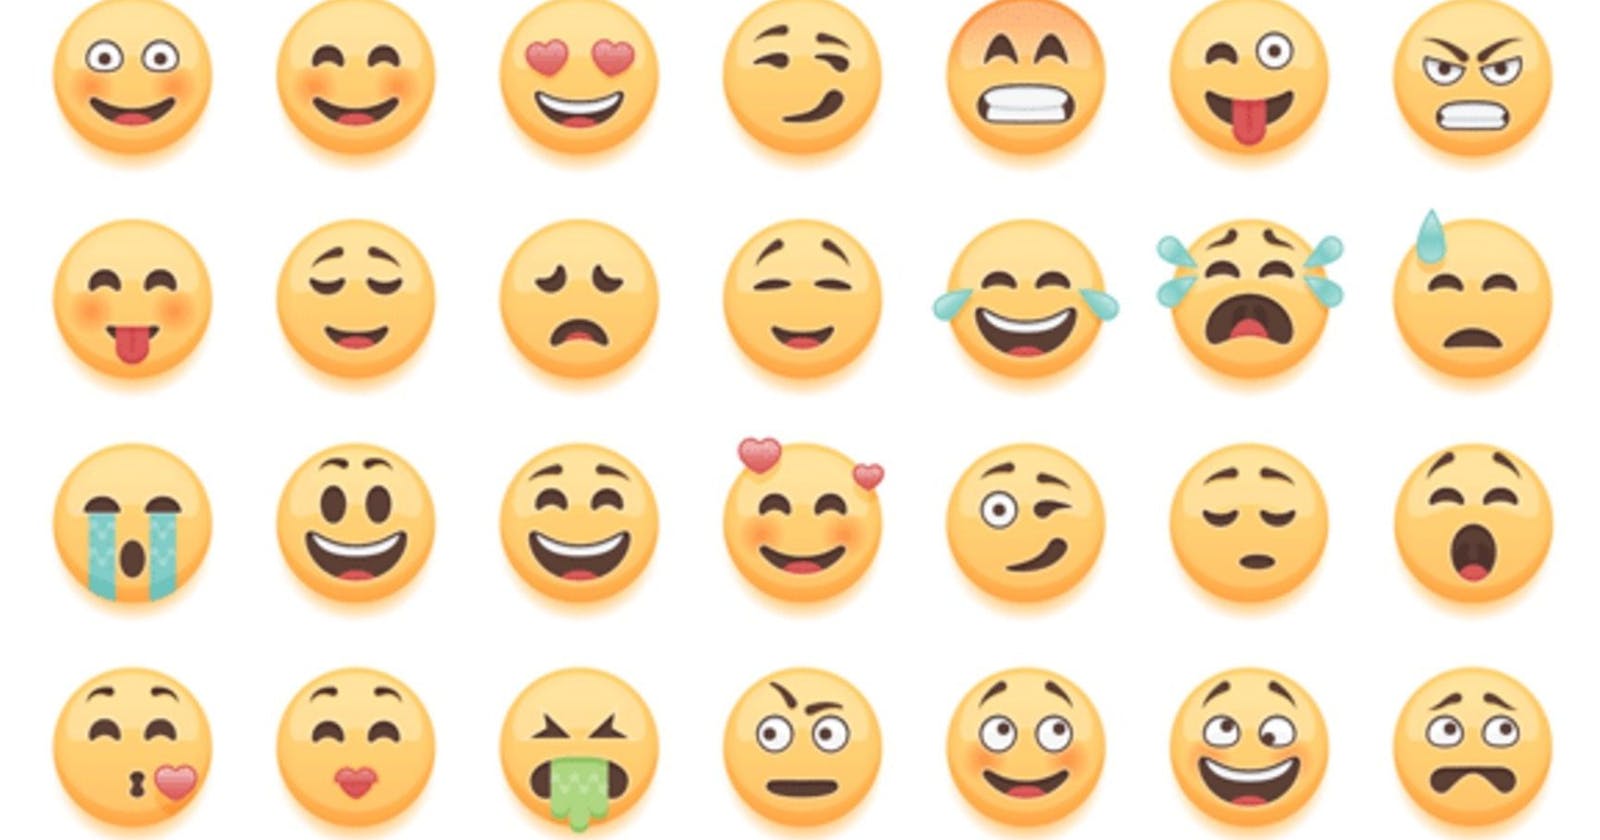 History of Emojis - The icons we know and love.